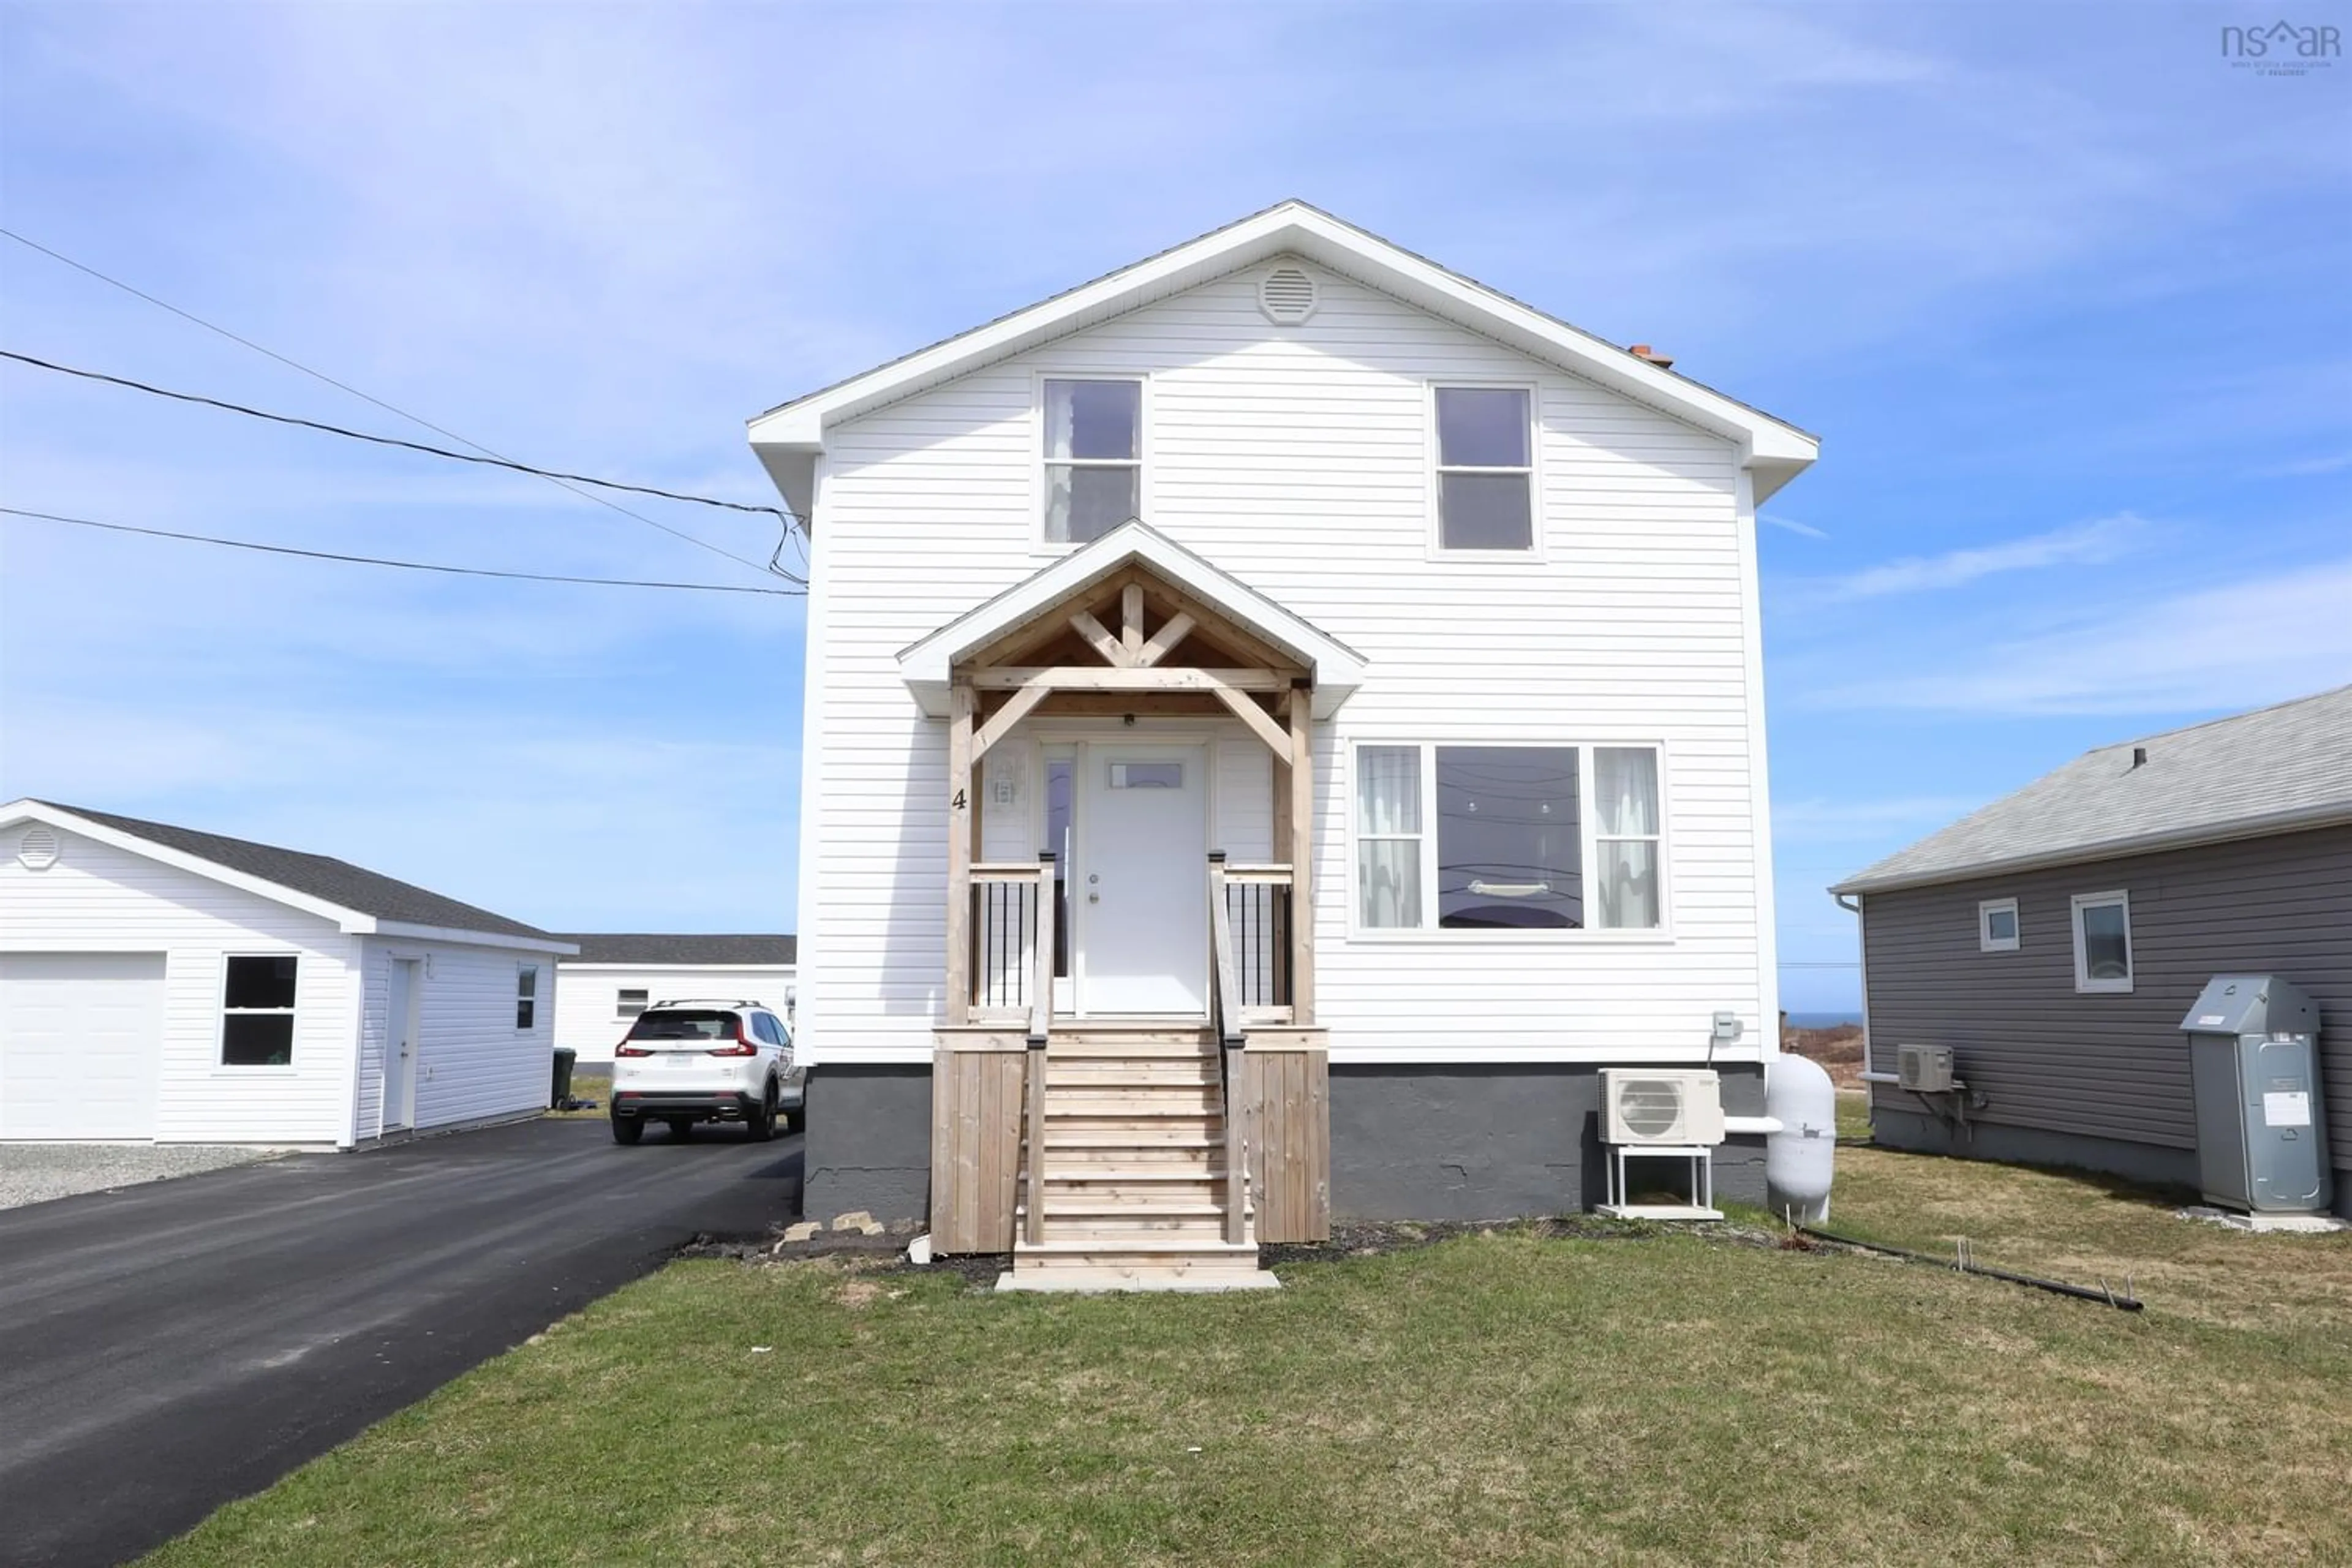 Outside view for 4 Cooling Street, Glace Bay Nova Scotia B1A 5R7